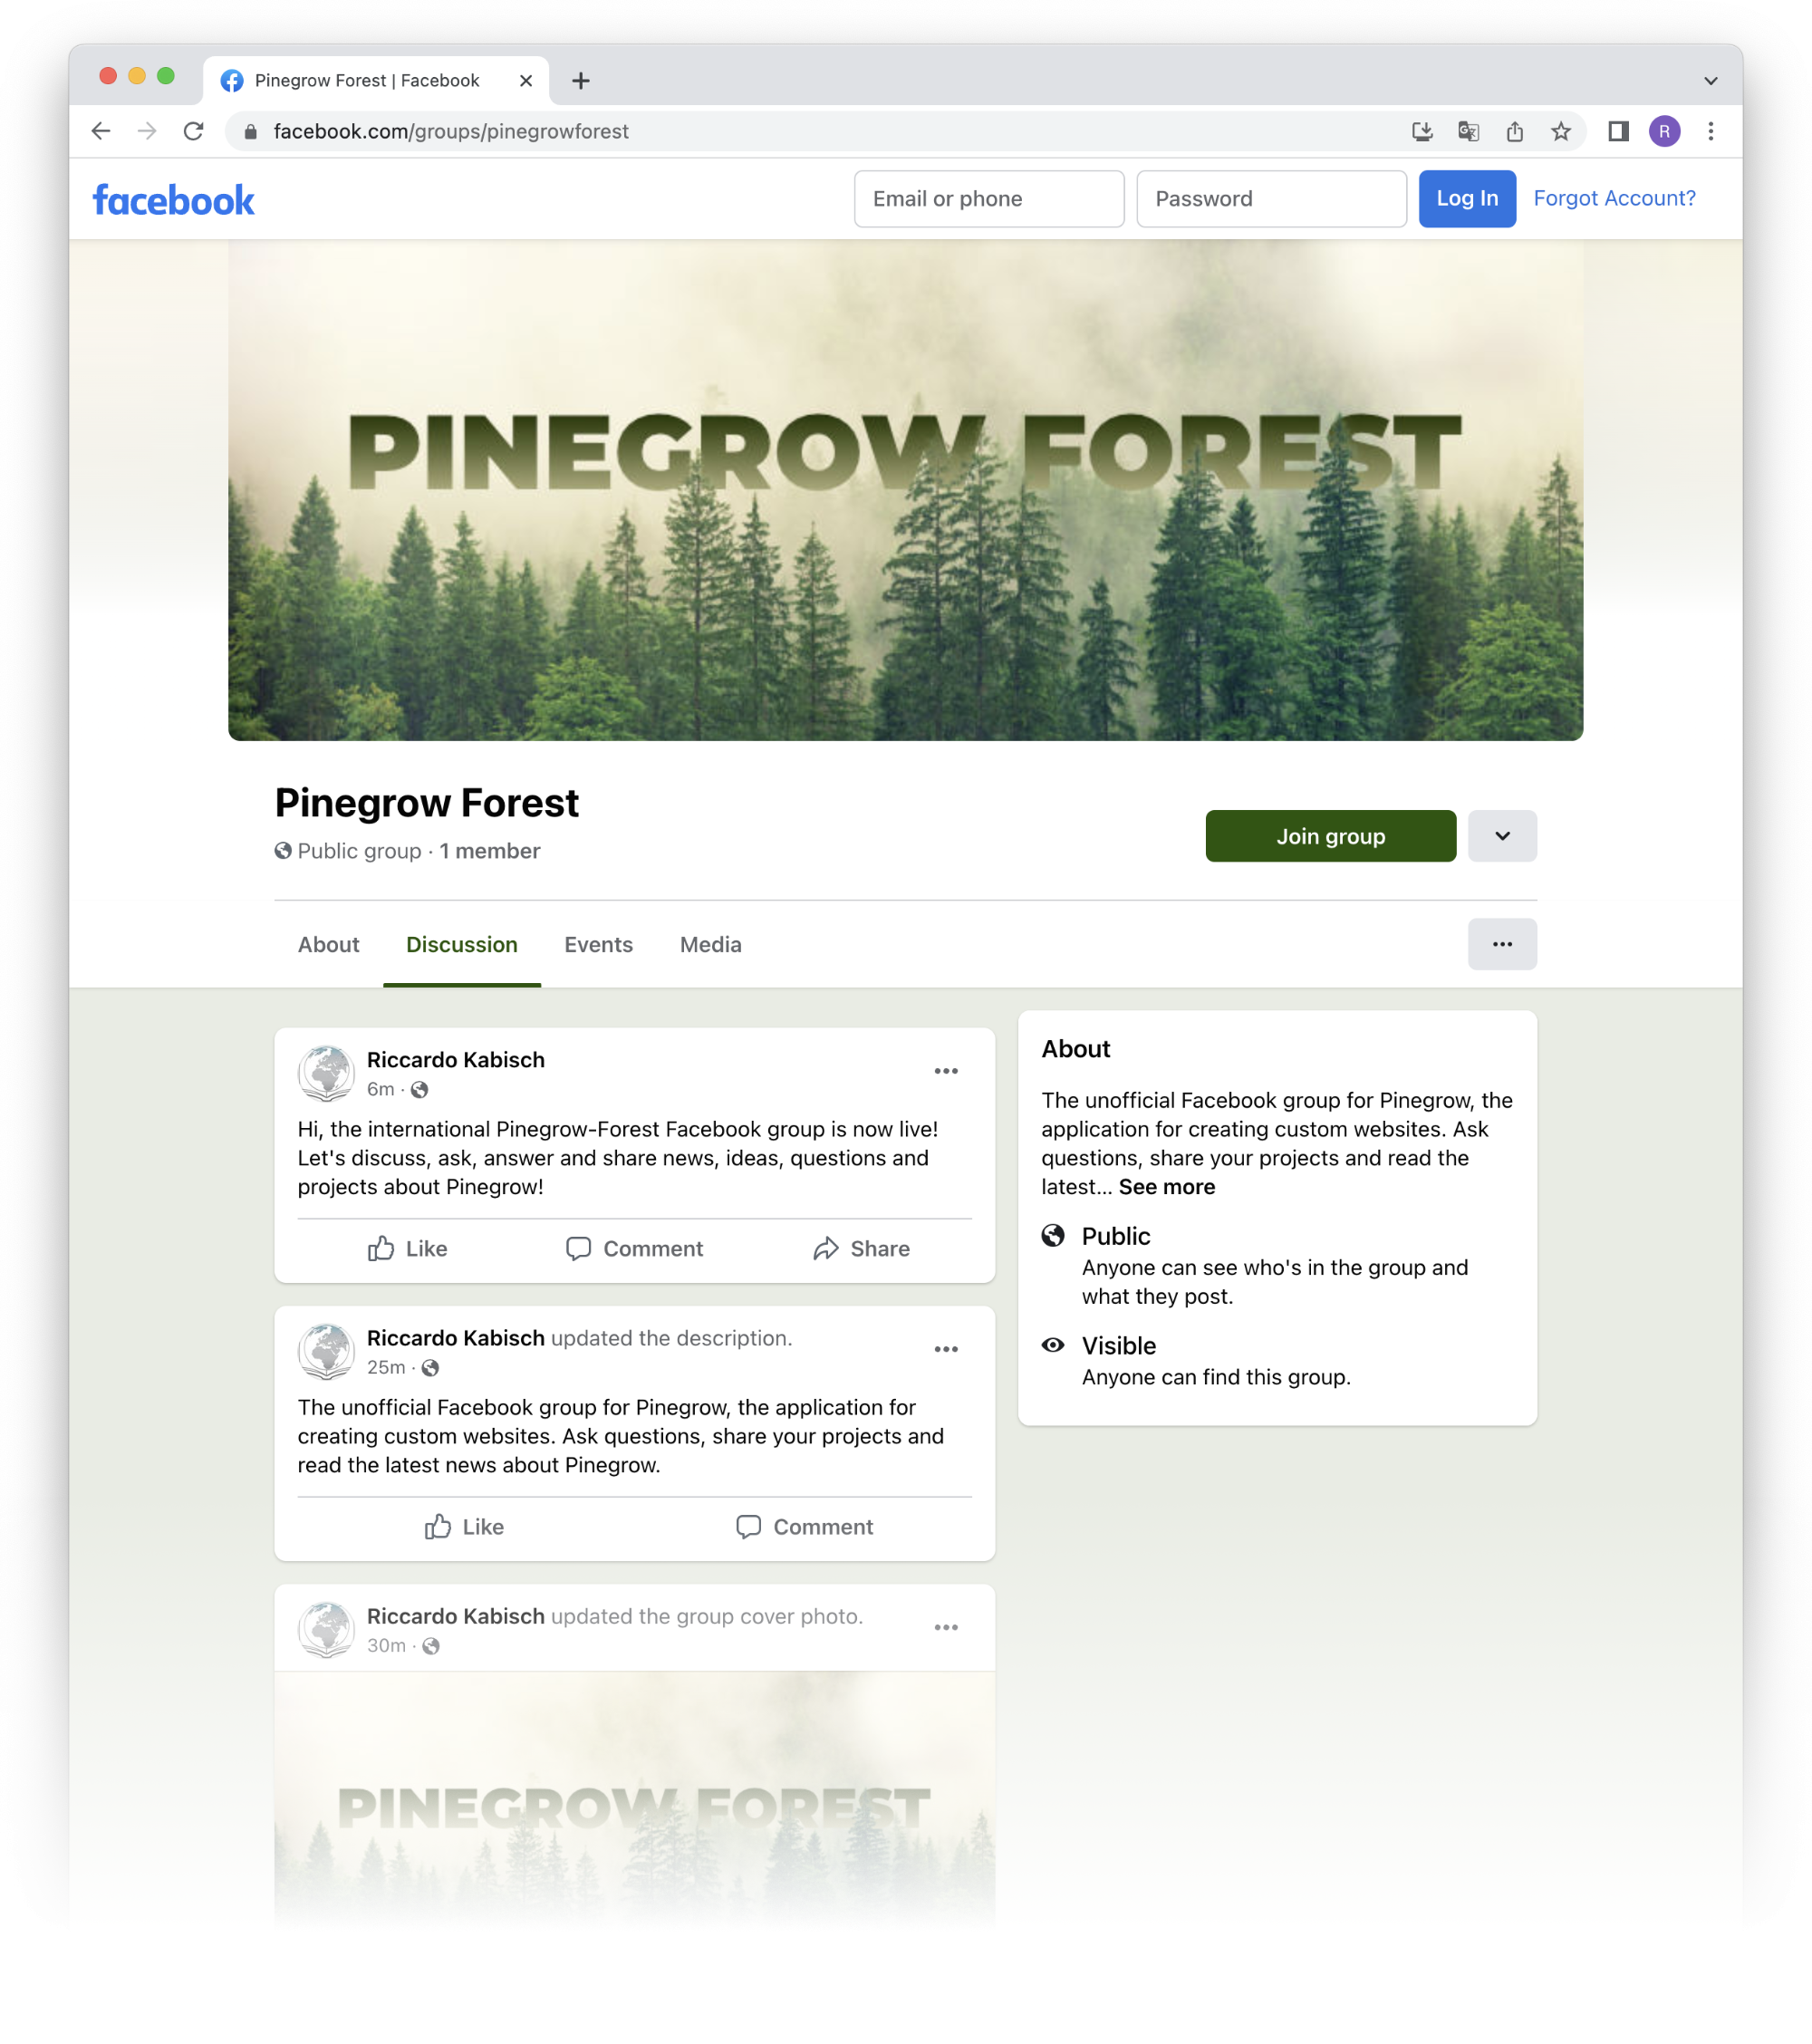 Pinegrow Forest Facebook group with help, tips and tricks around Pinegrow